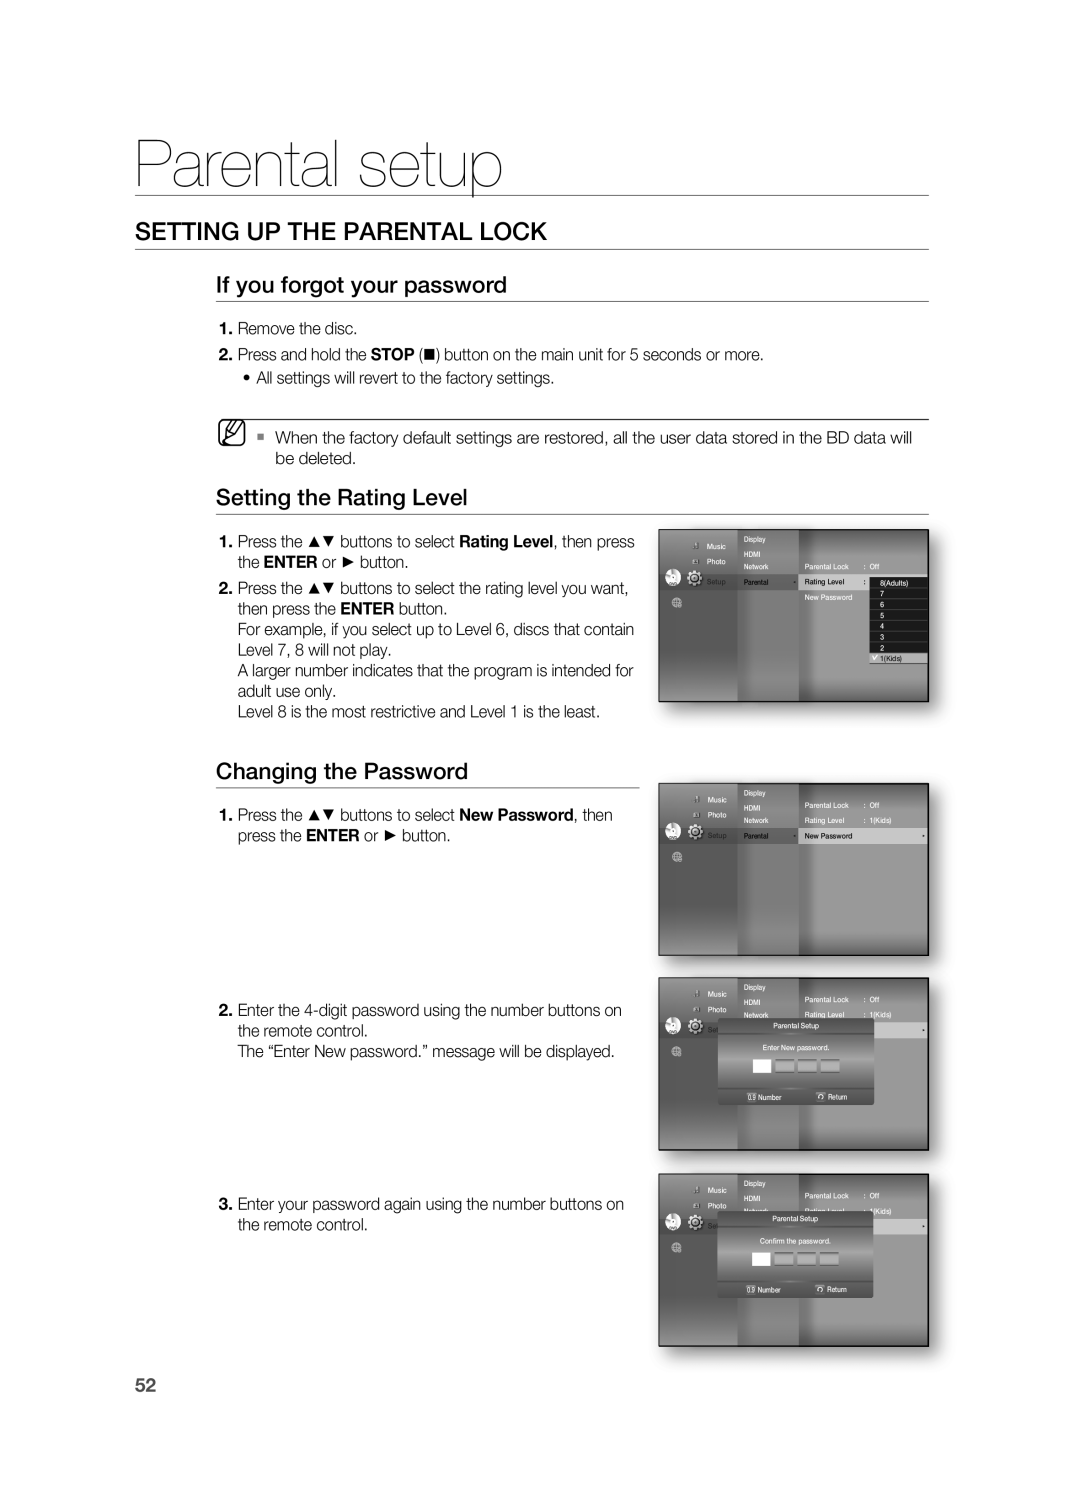 Samsung HT-BD3252 user manual If you forgot your password, Setting the Rating Level, Changing the Password, Parental setup 